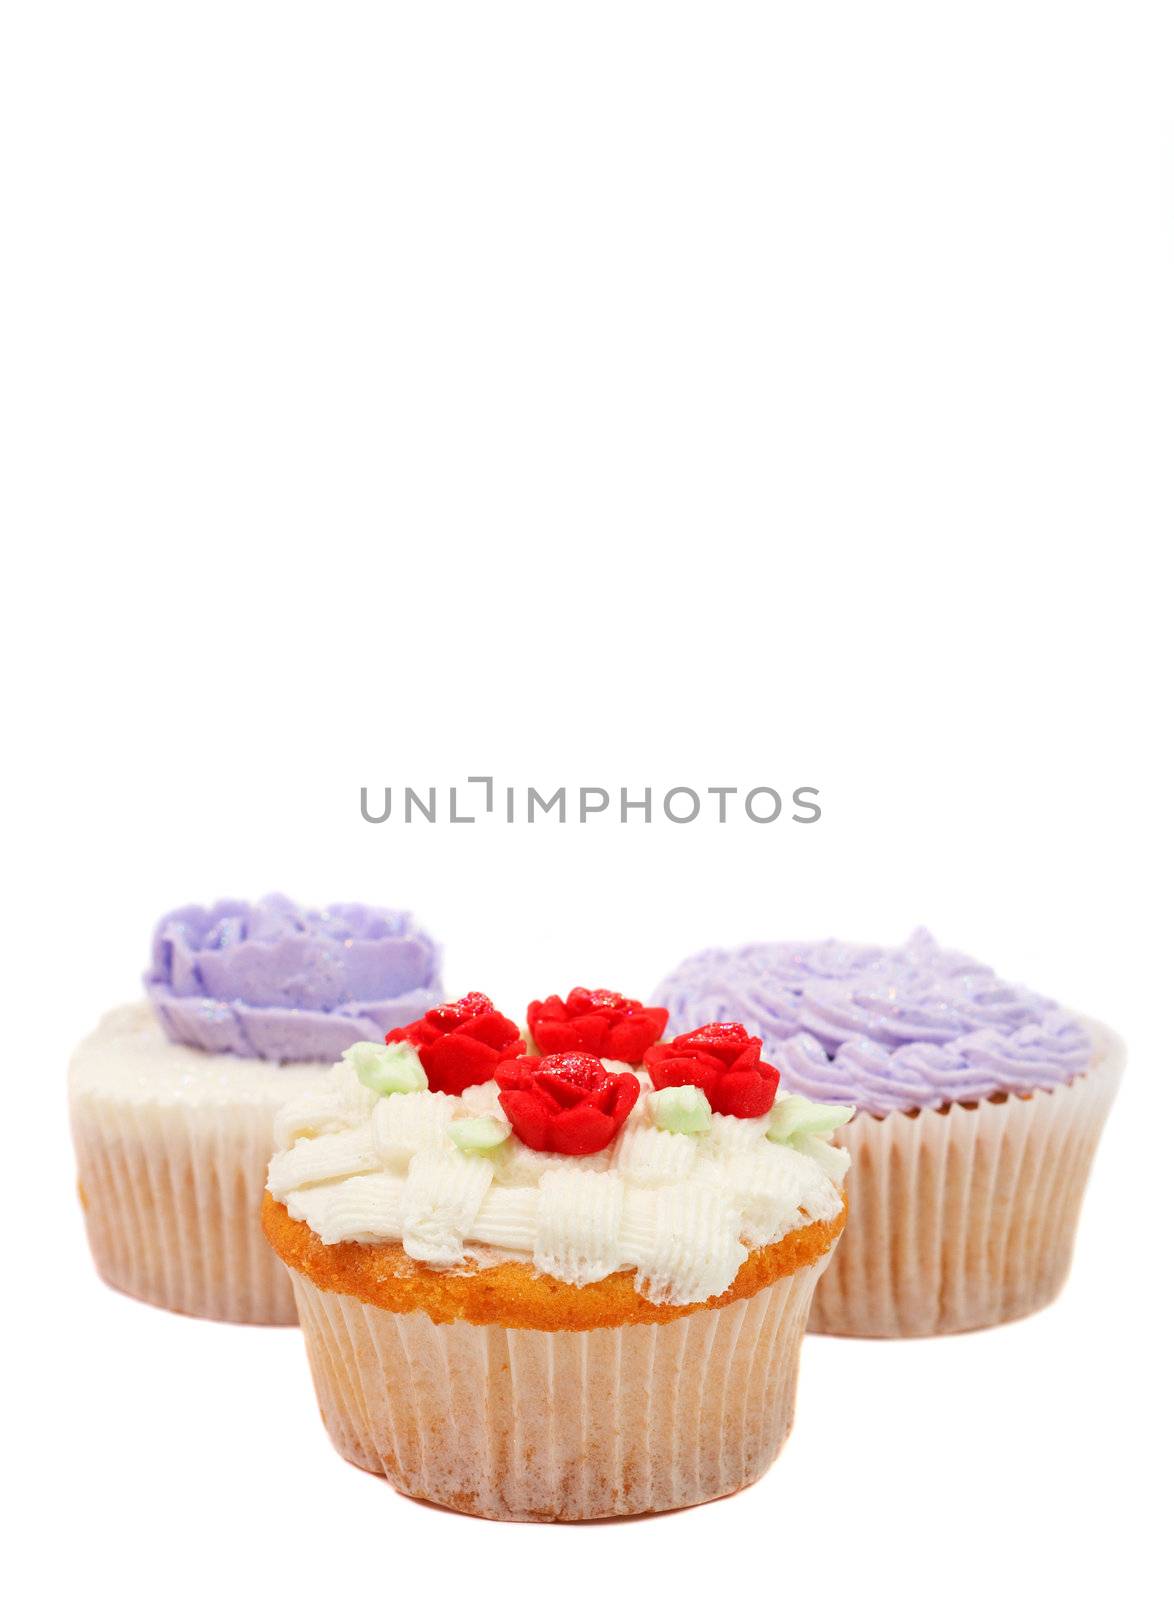 Variety of vanilla cupcakes with various buttercream decorations on white background